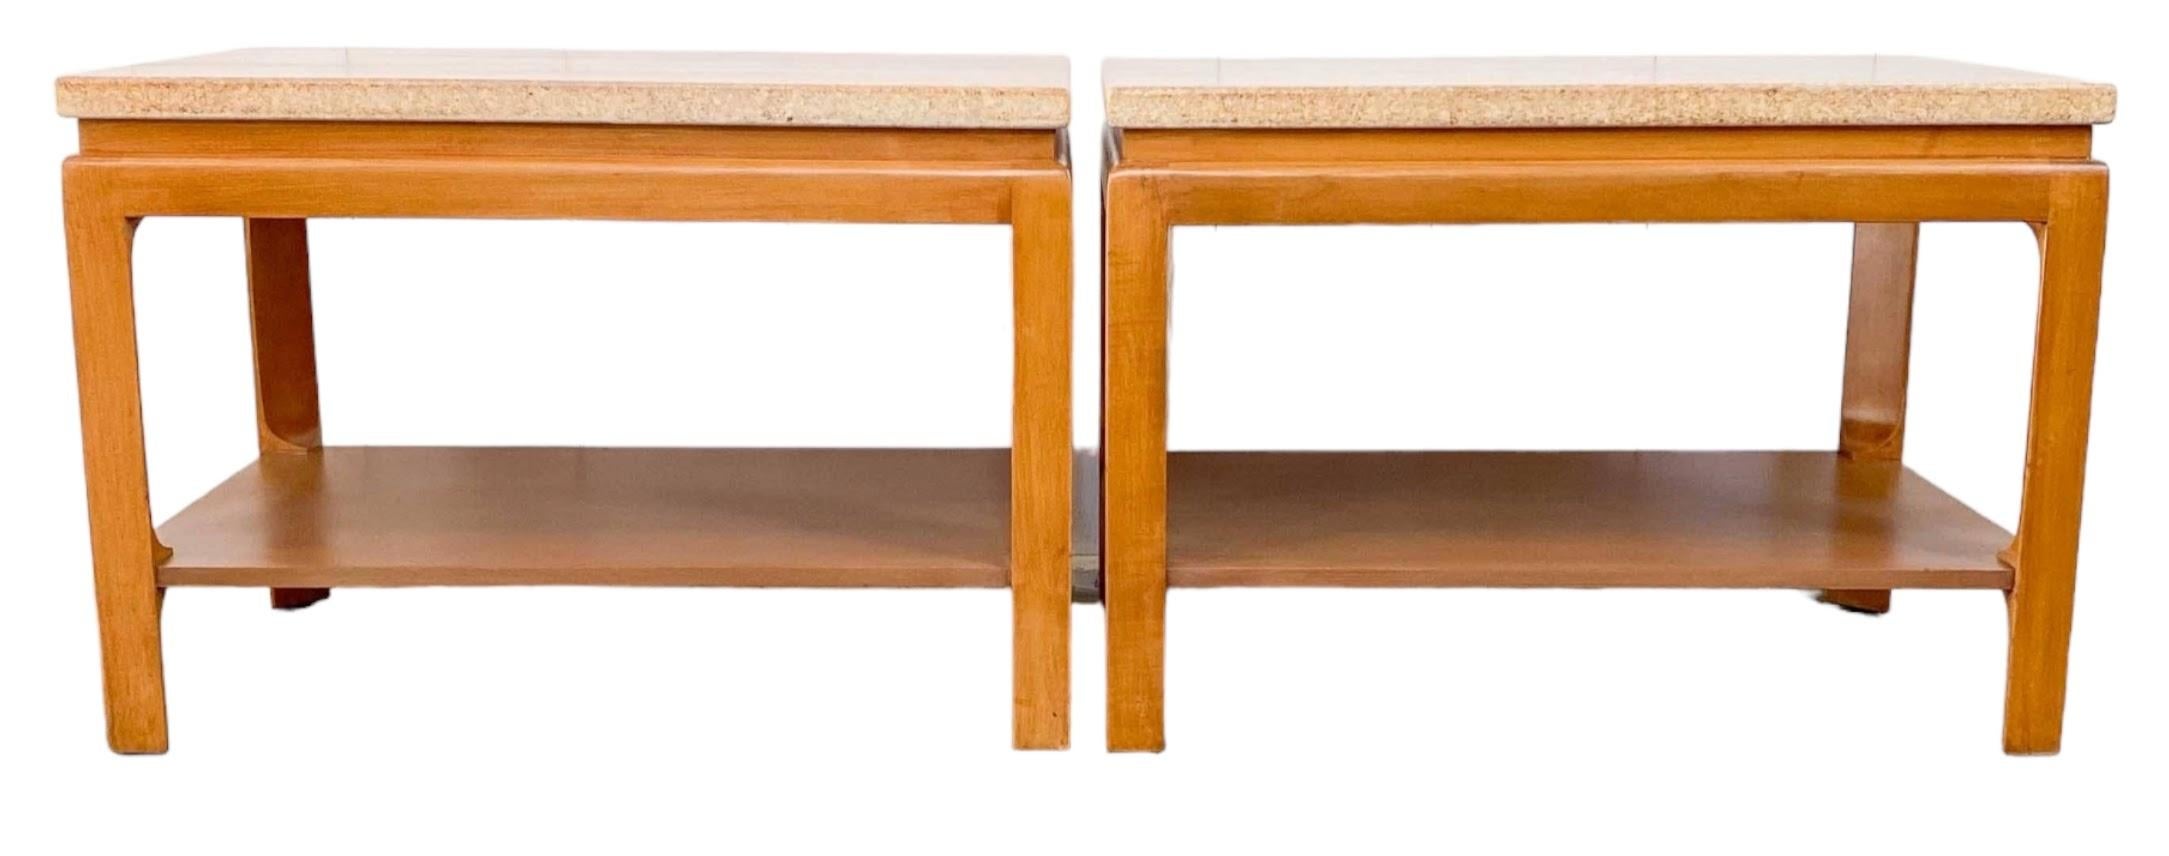 20th Century Pair of Paul T. Frankl for Johnson Cork Top Two Tier Side or End Tables, 1950s For Sale